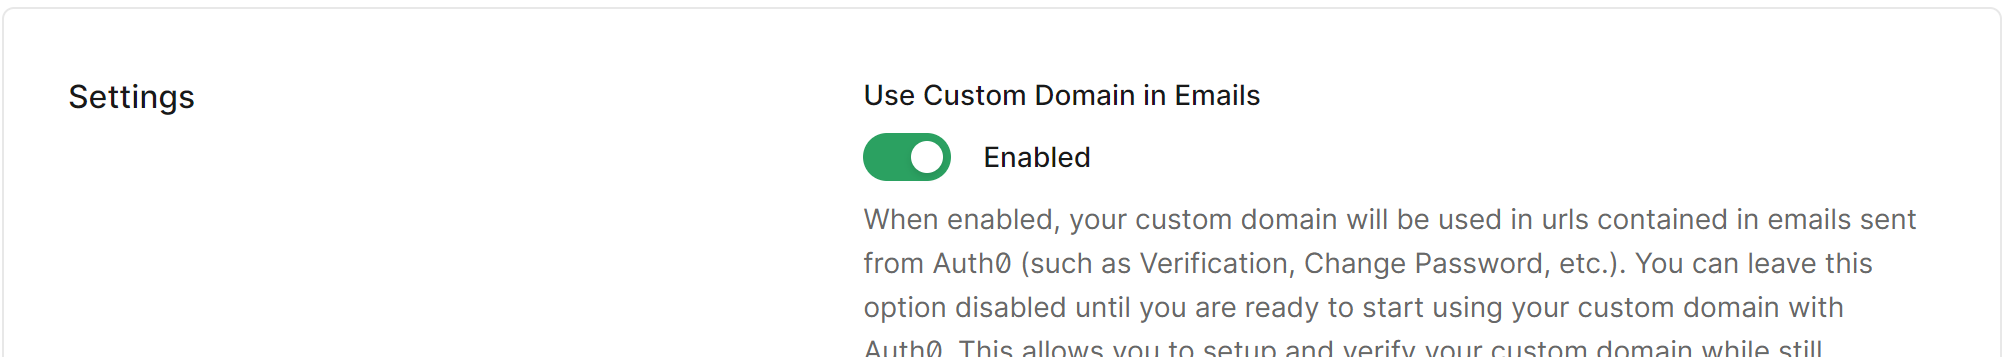 Enable Settings > Use Custom Domain in Emails